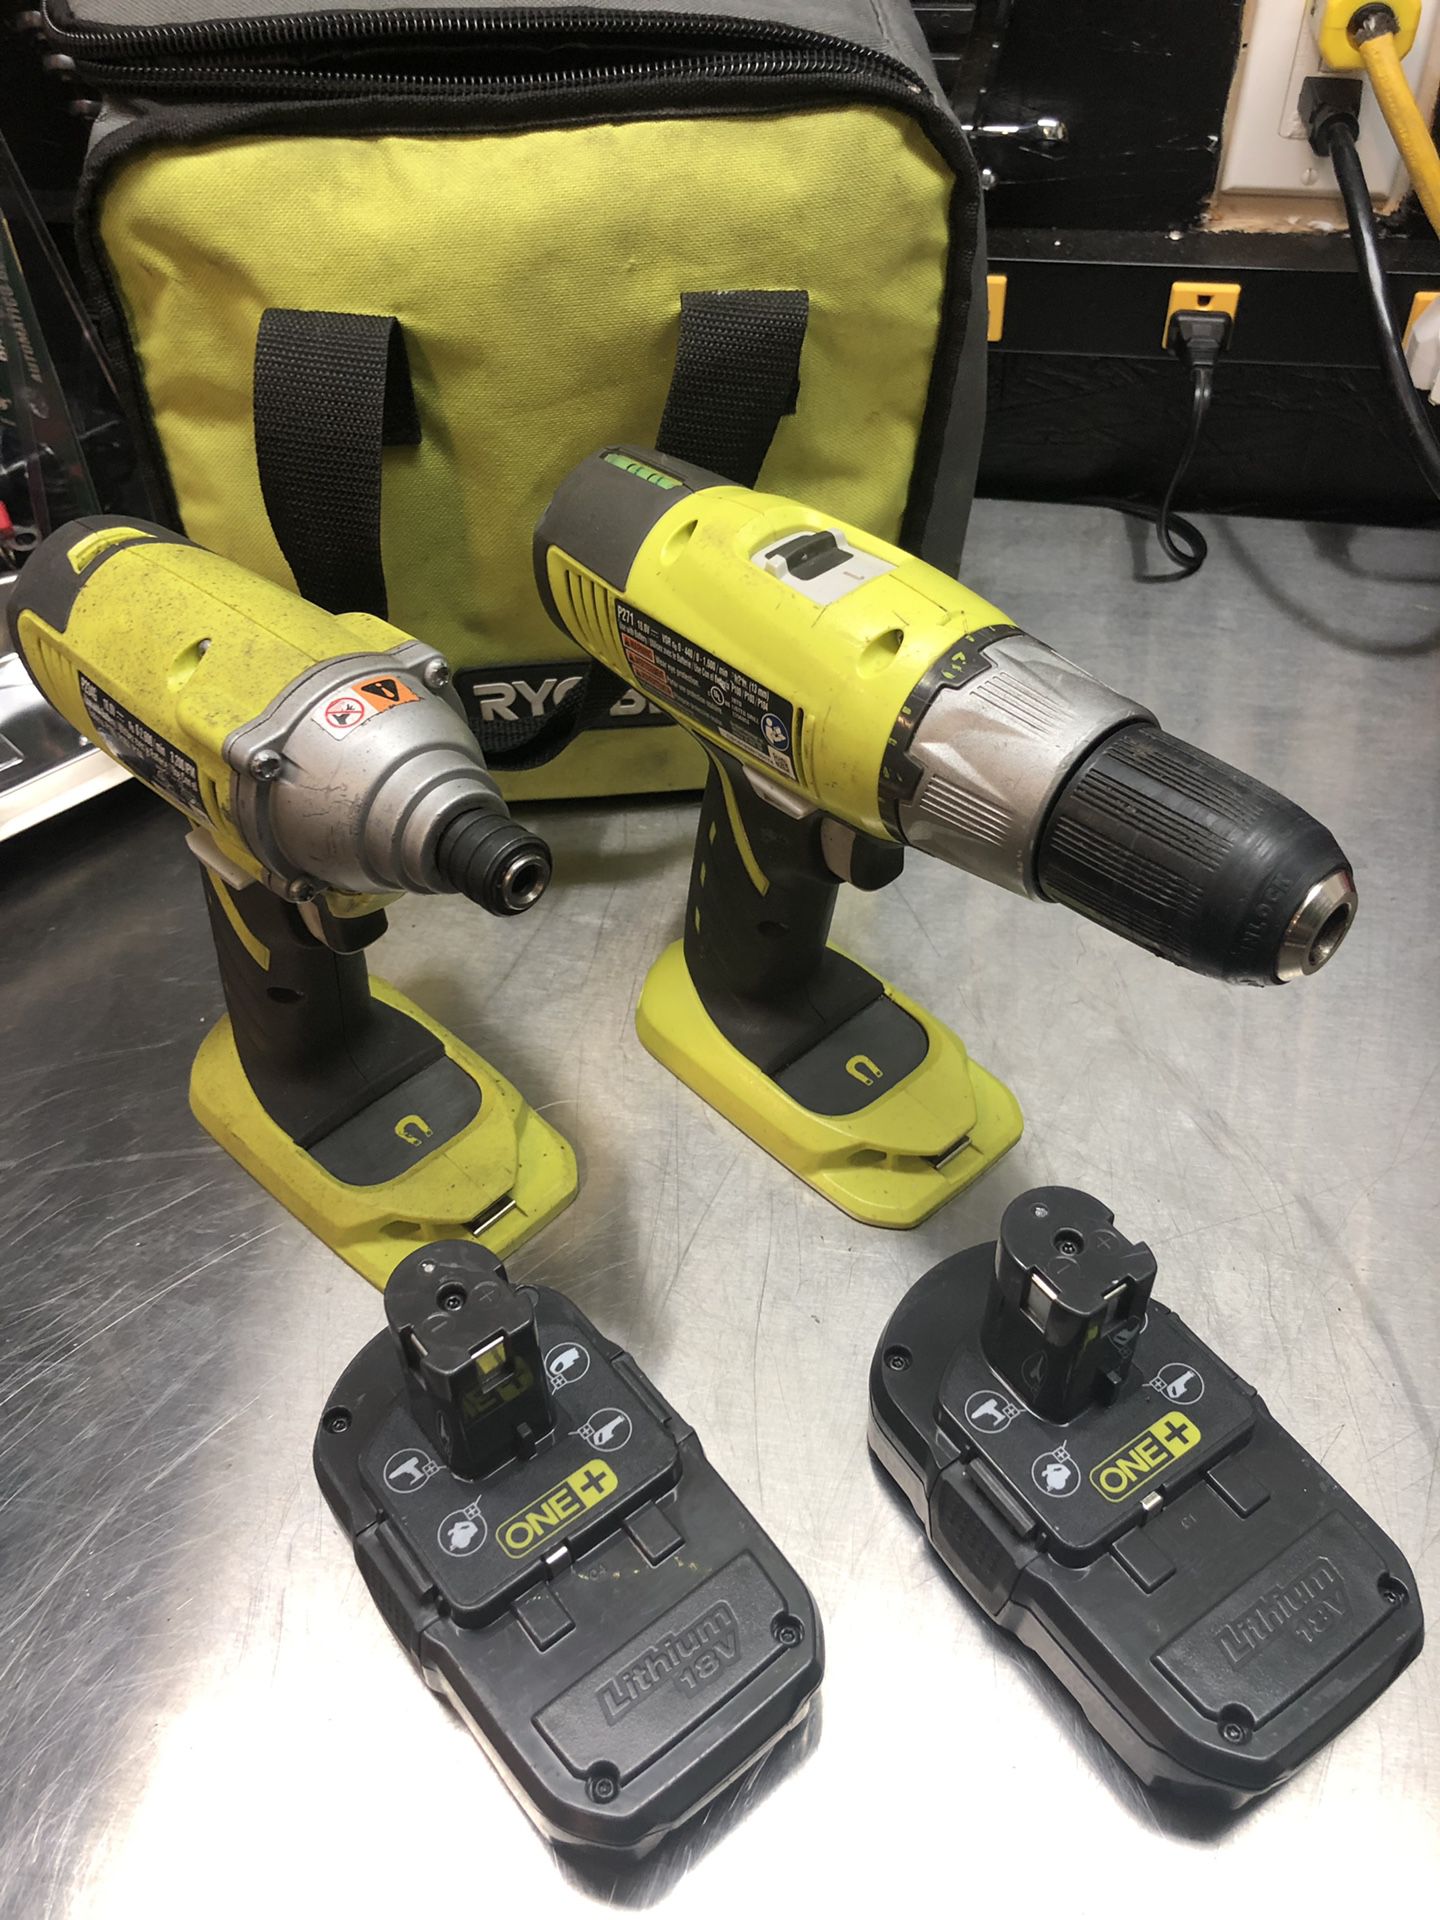 Ryobi One+ 1/2” drill and impact wrench with 2 batteries and charger